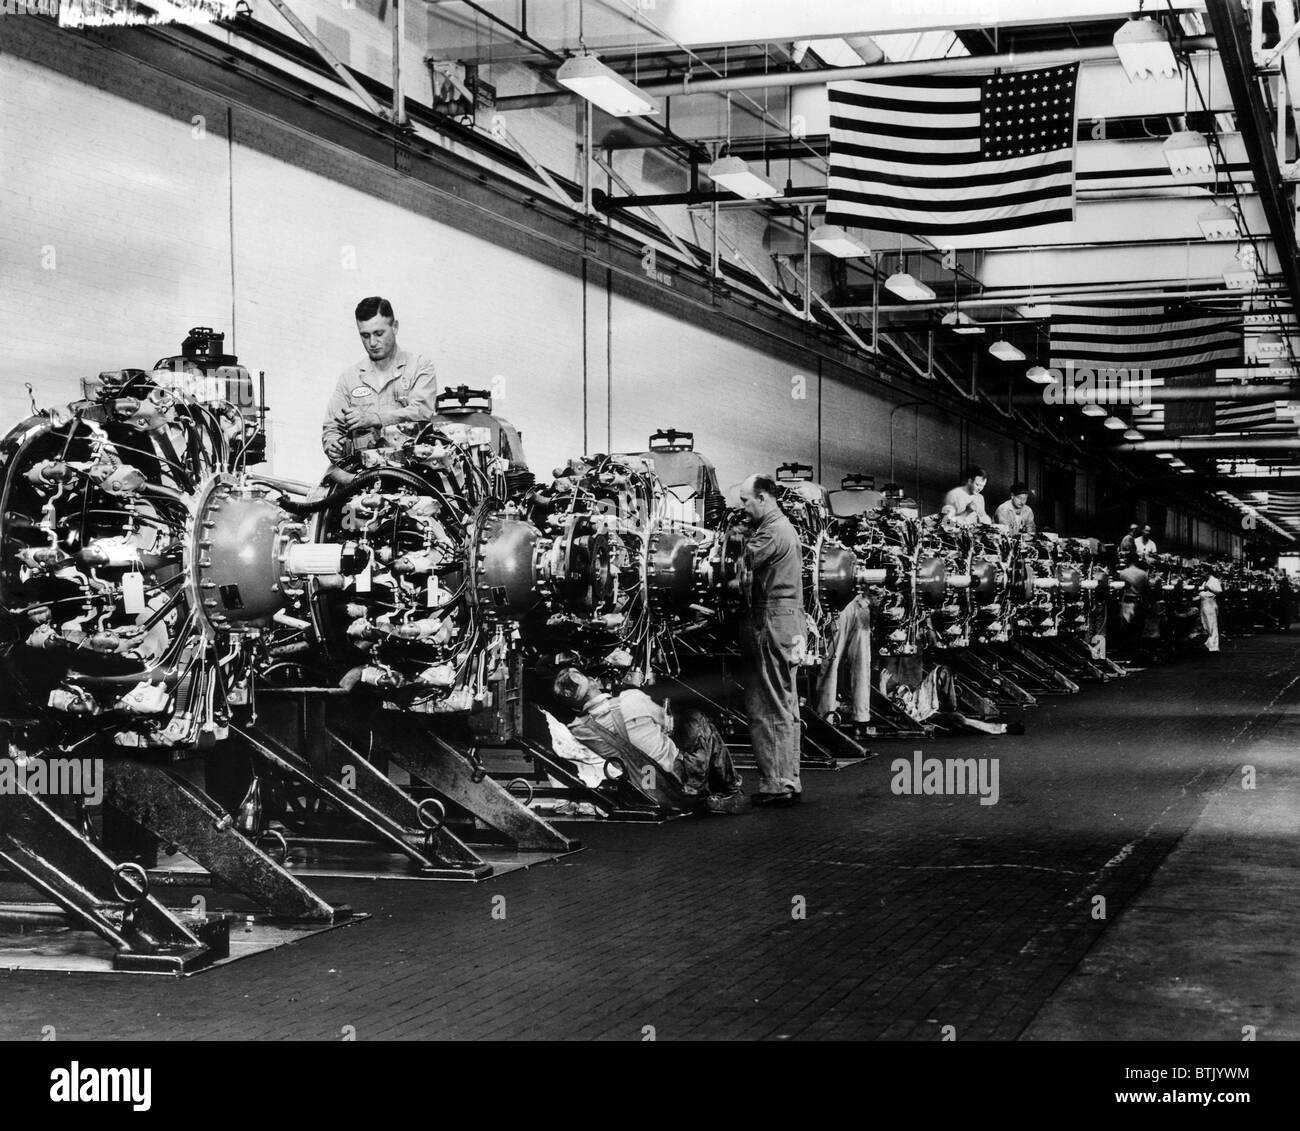 Men prepare engines for the B-24 Liberator bomber airplane at a Buick plant, 1943. Courtesy: CSU Archives/Everett Collection Stock Photo